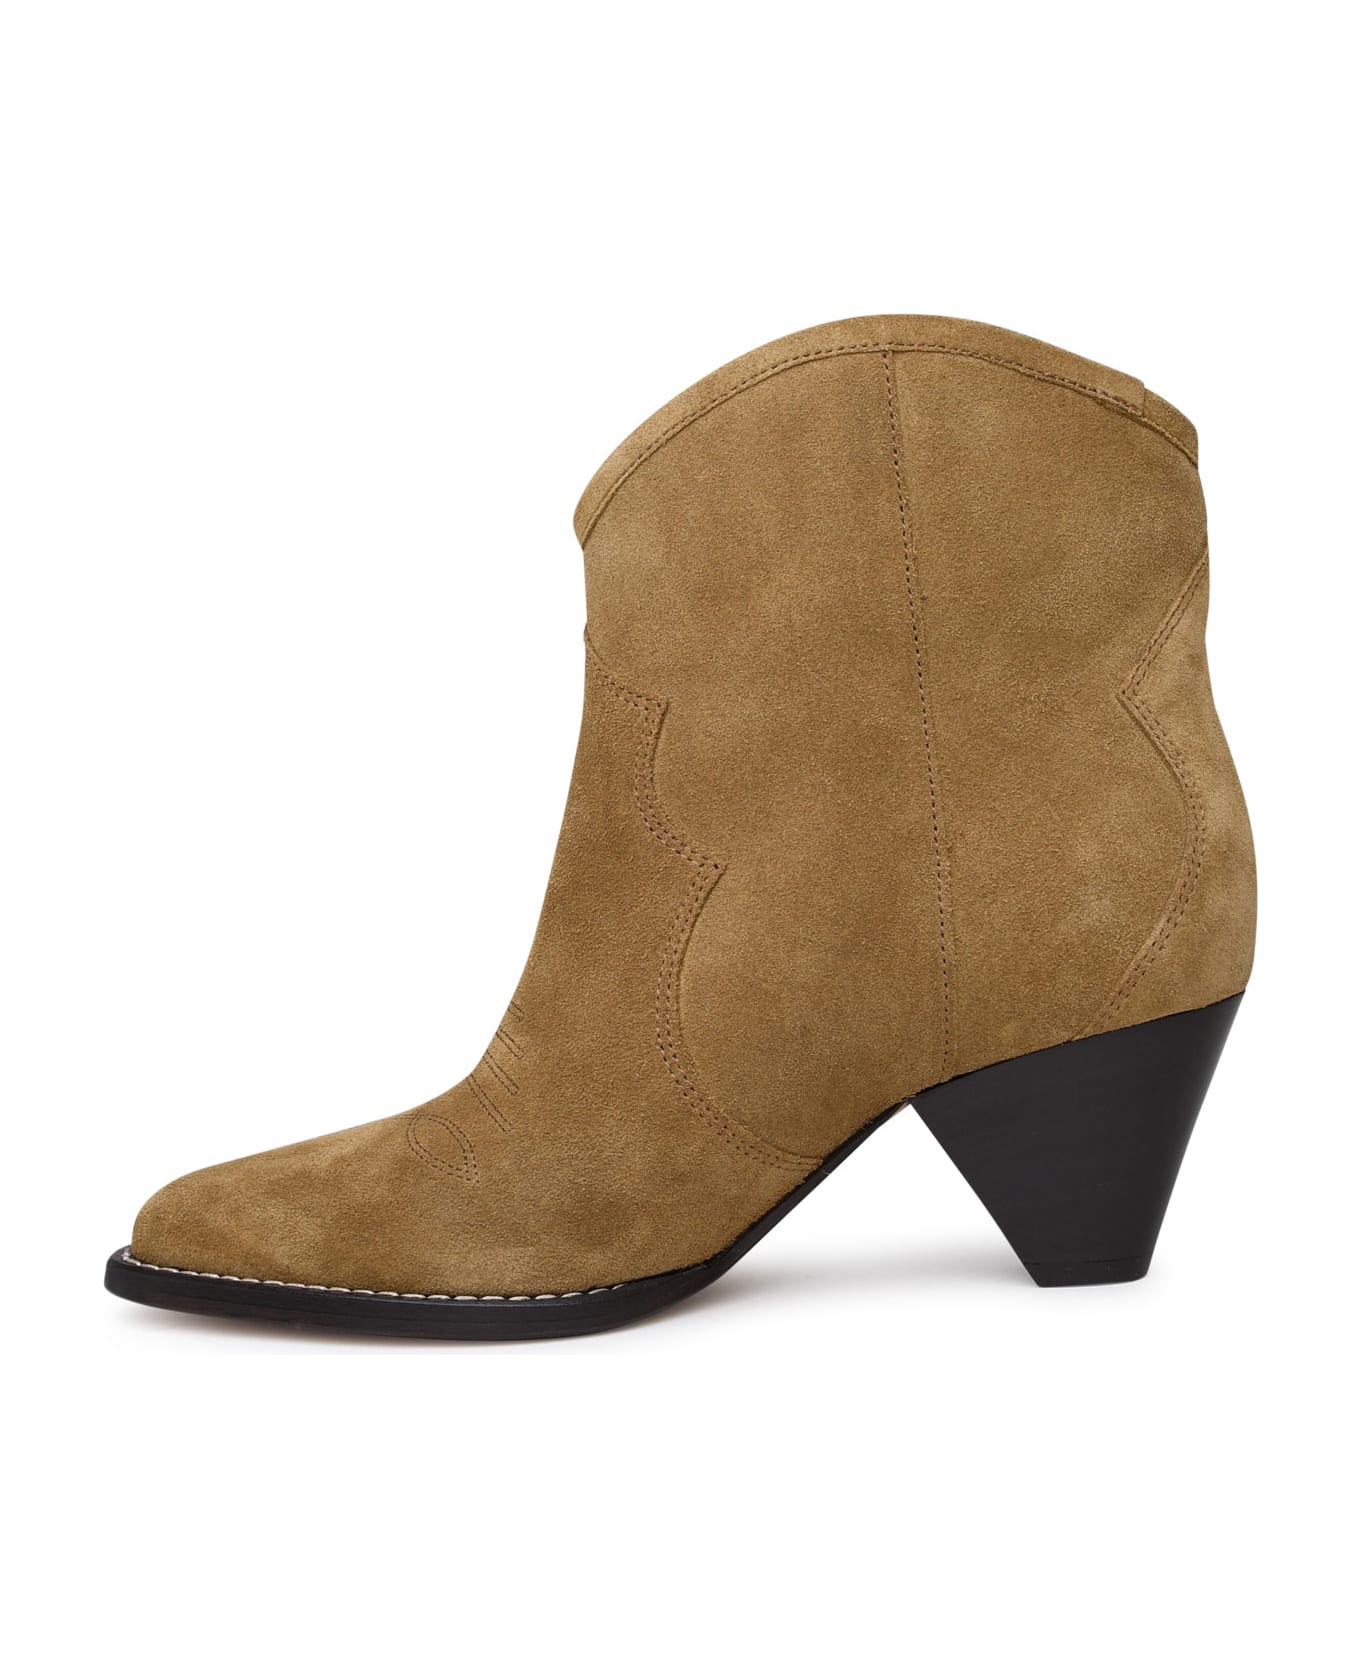 Isabel Marant Darizo Suede Ankle Boots - Brown